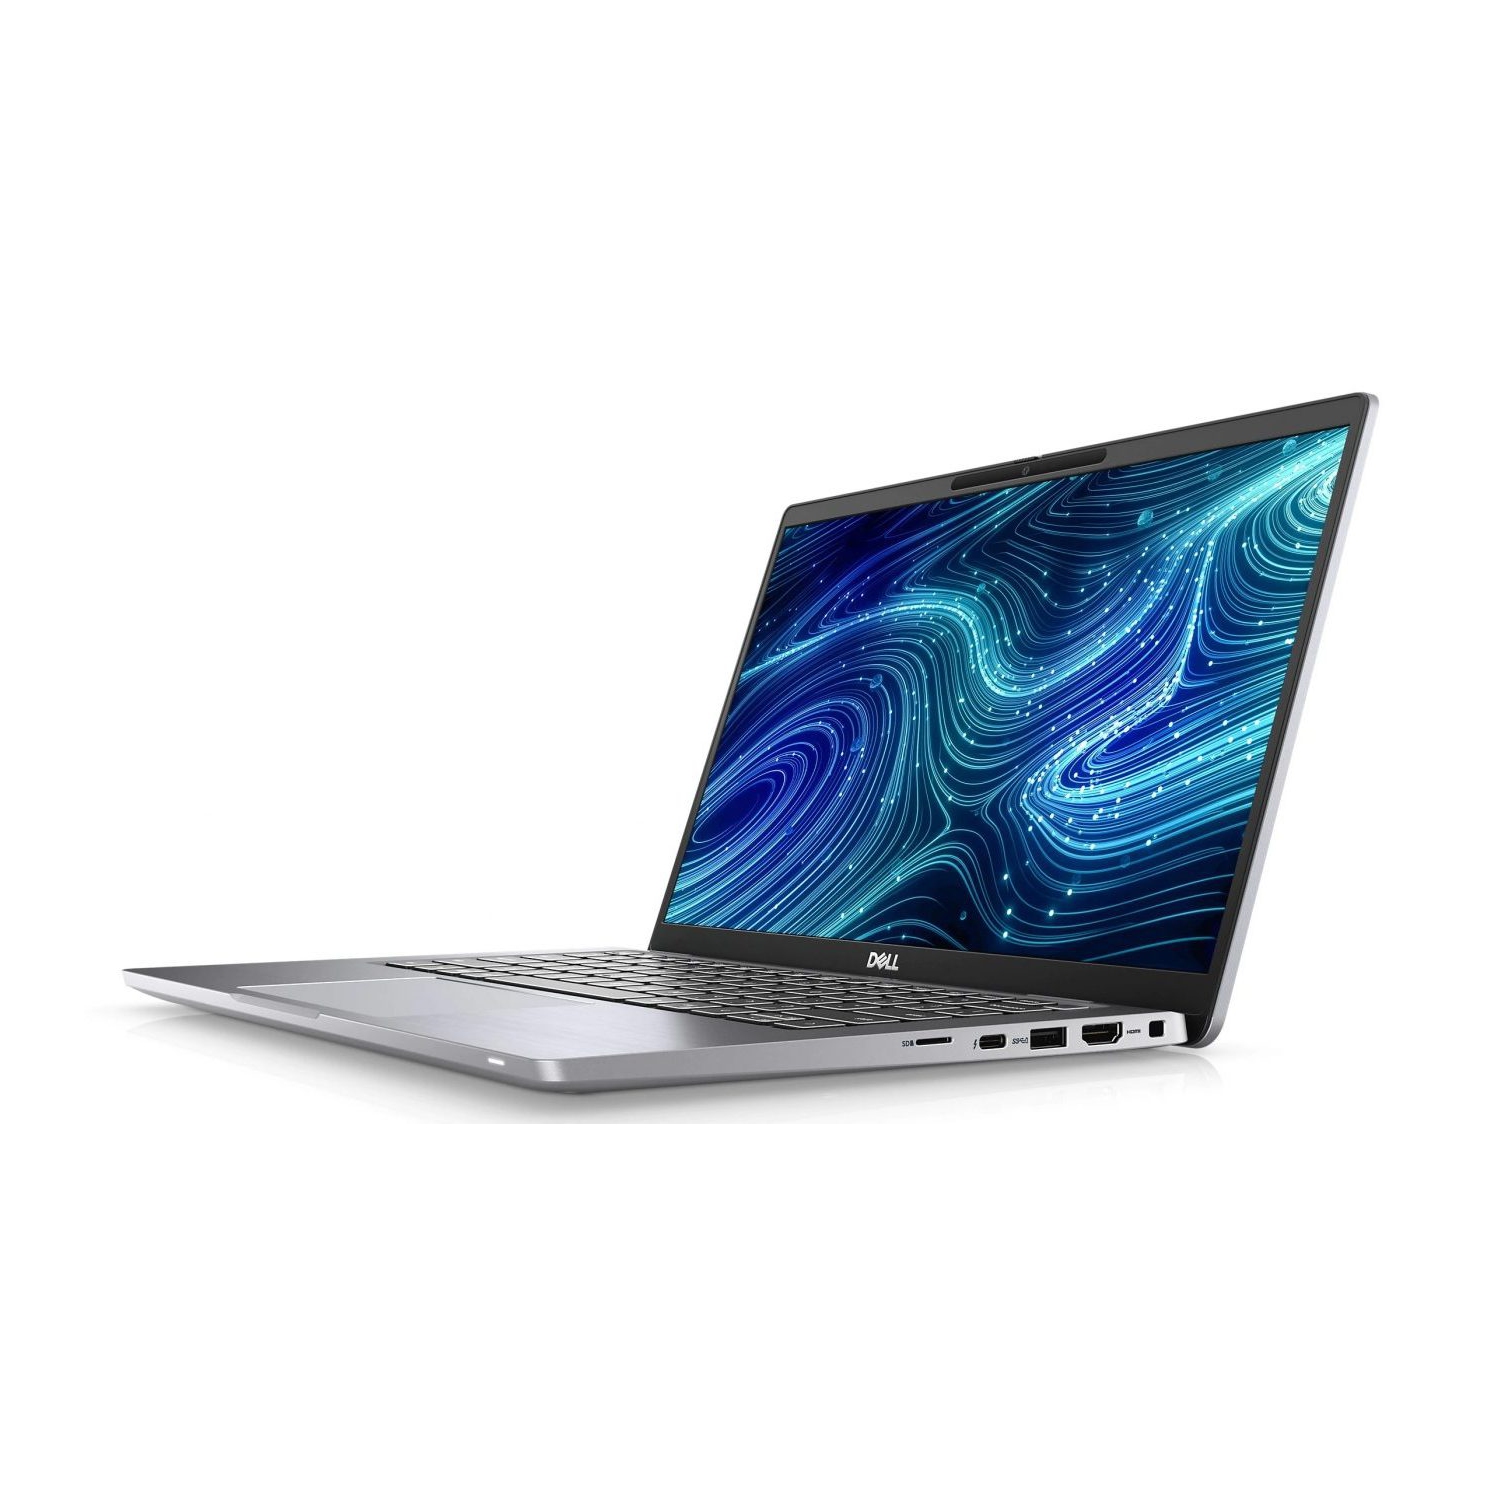 Refurbished (Excellent) - Dell Latitude 7000 7420 Laptop (2021) | 14" FHD | Core i7 - 256GB SSD - 16GB RAM | 4 Cores @ 4.4 GHz - 11th Gen CPU Certified Refurbished